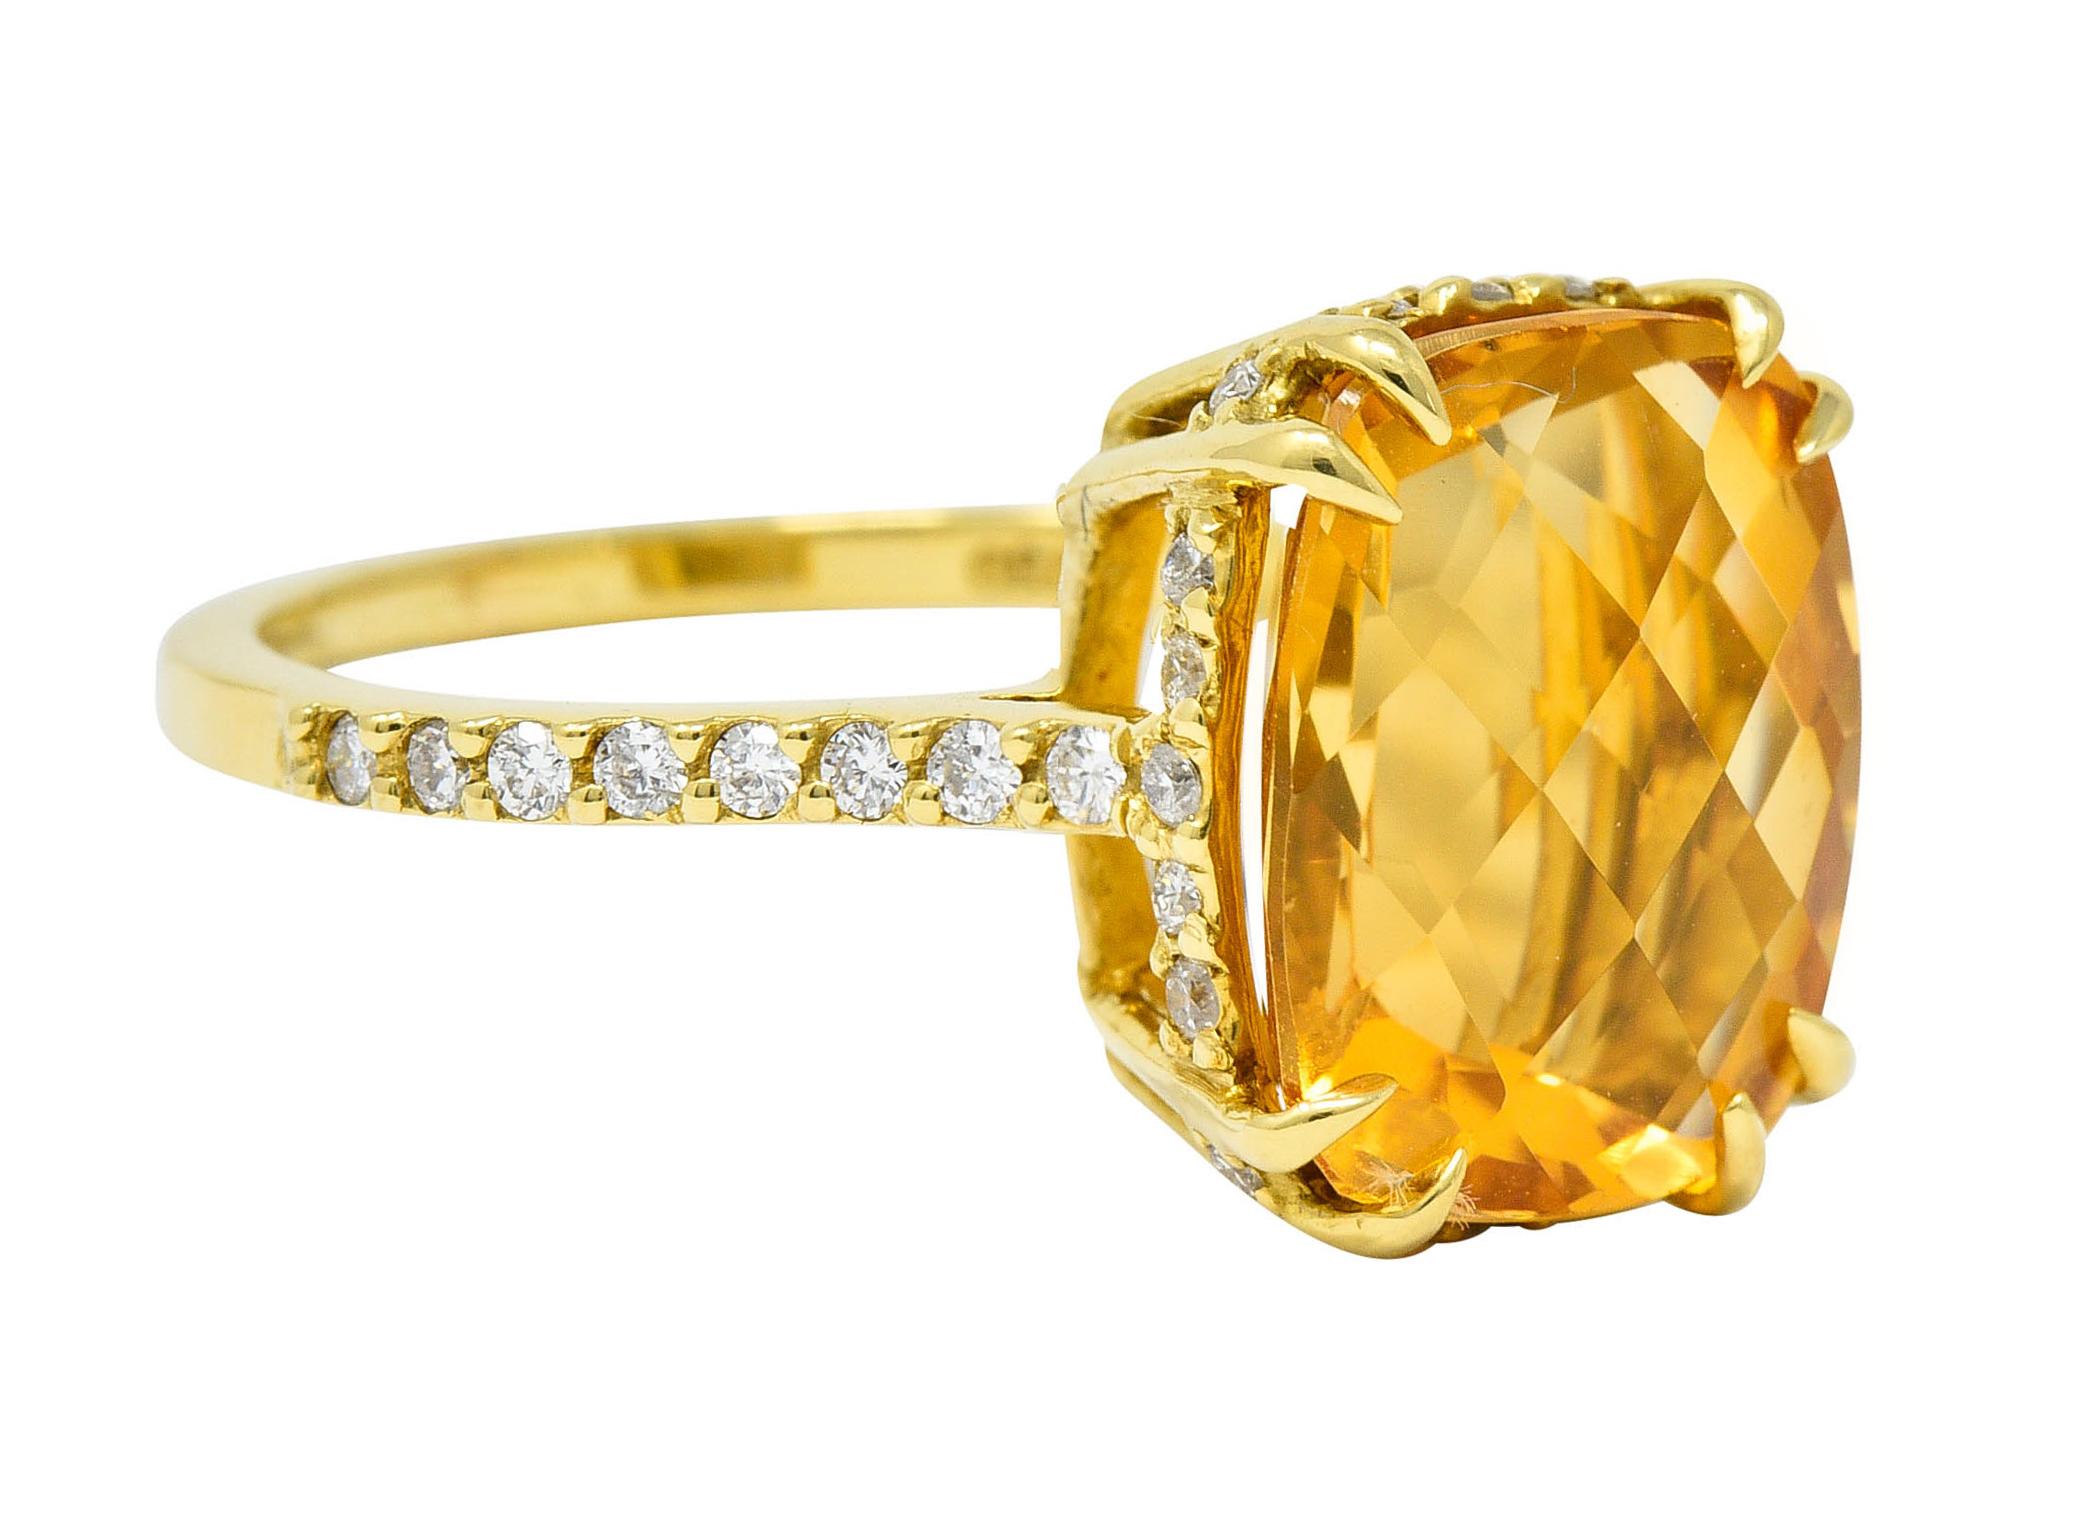 Centering a mixed checkerboard cushion cut citrine measuring approximately 12.0 x 10.0 mm

Basket set with split prongs; displaying transparent medium light yellowish orange color

Accented throughout by round brilliant cut diamonds weighing in